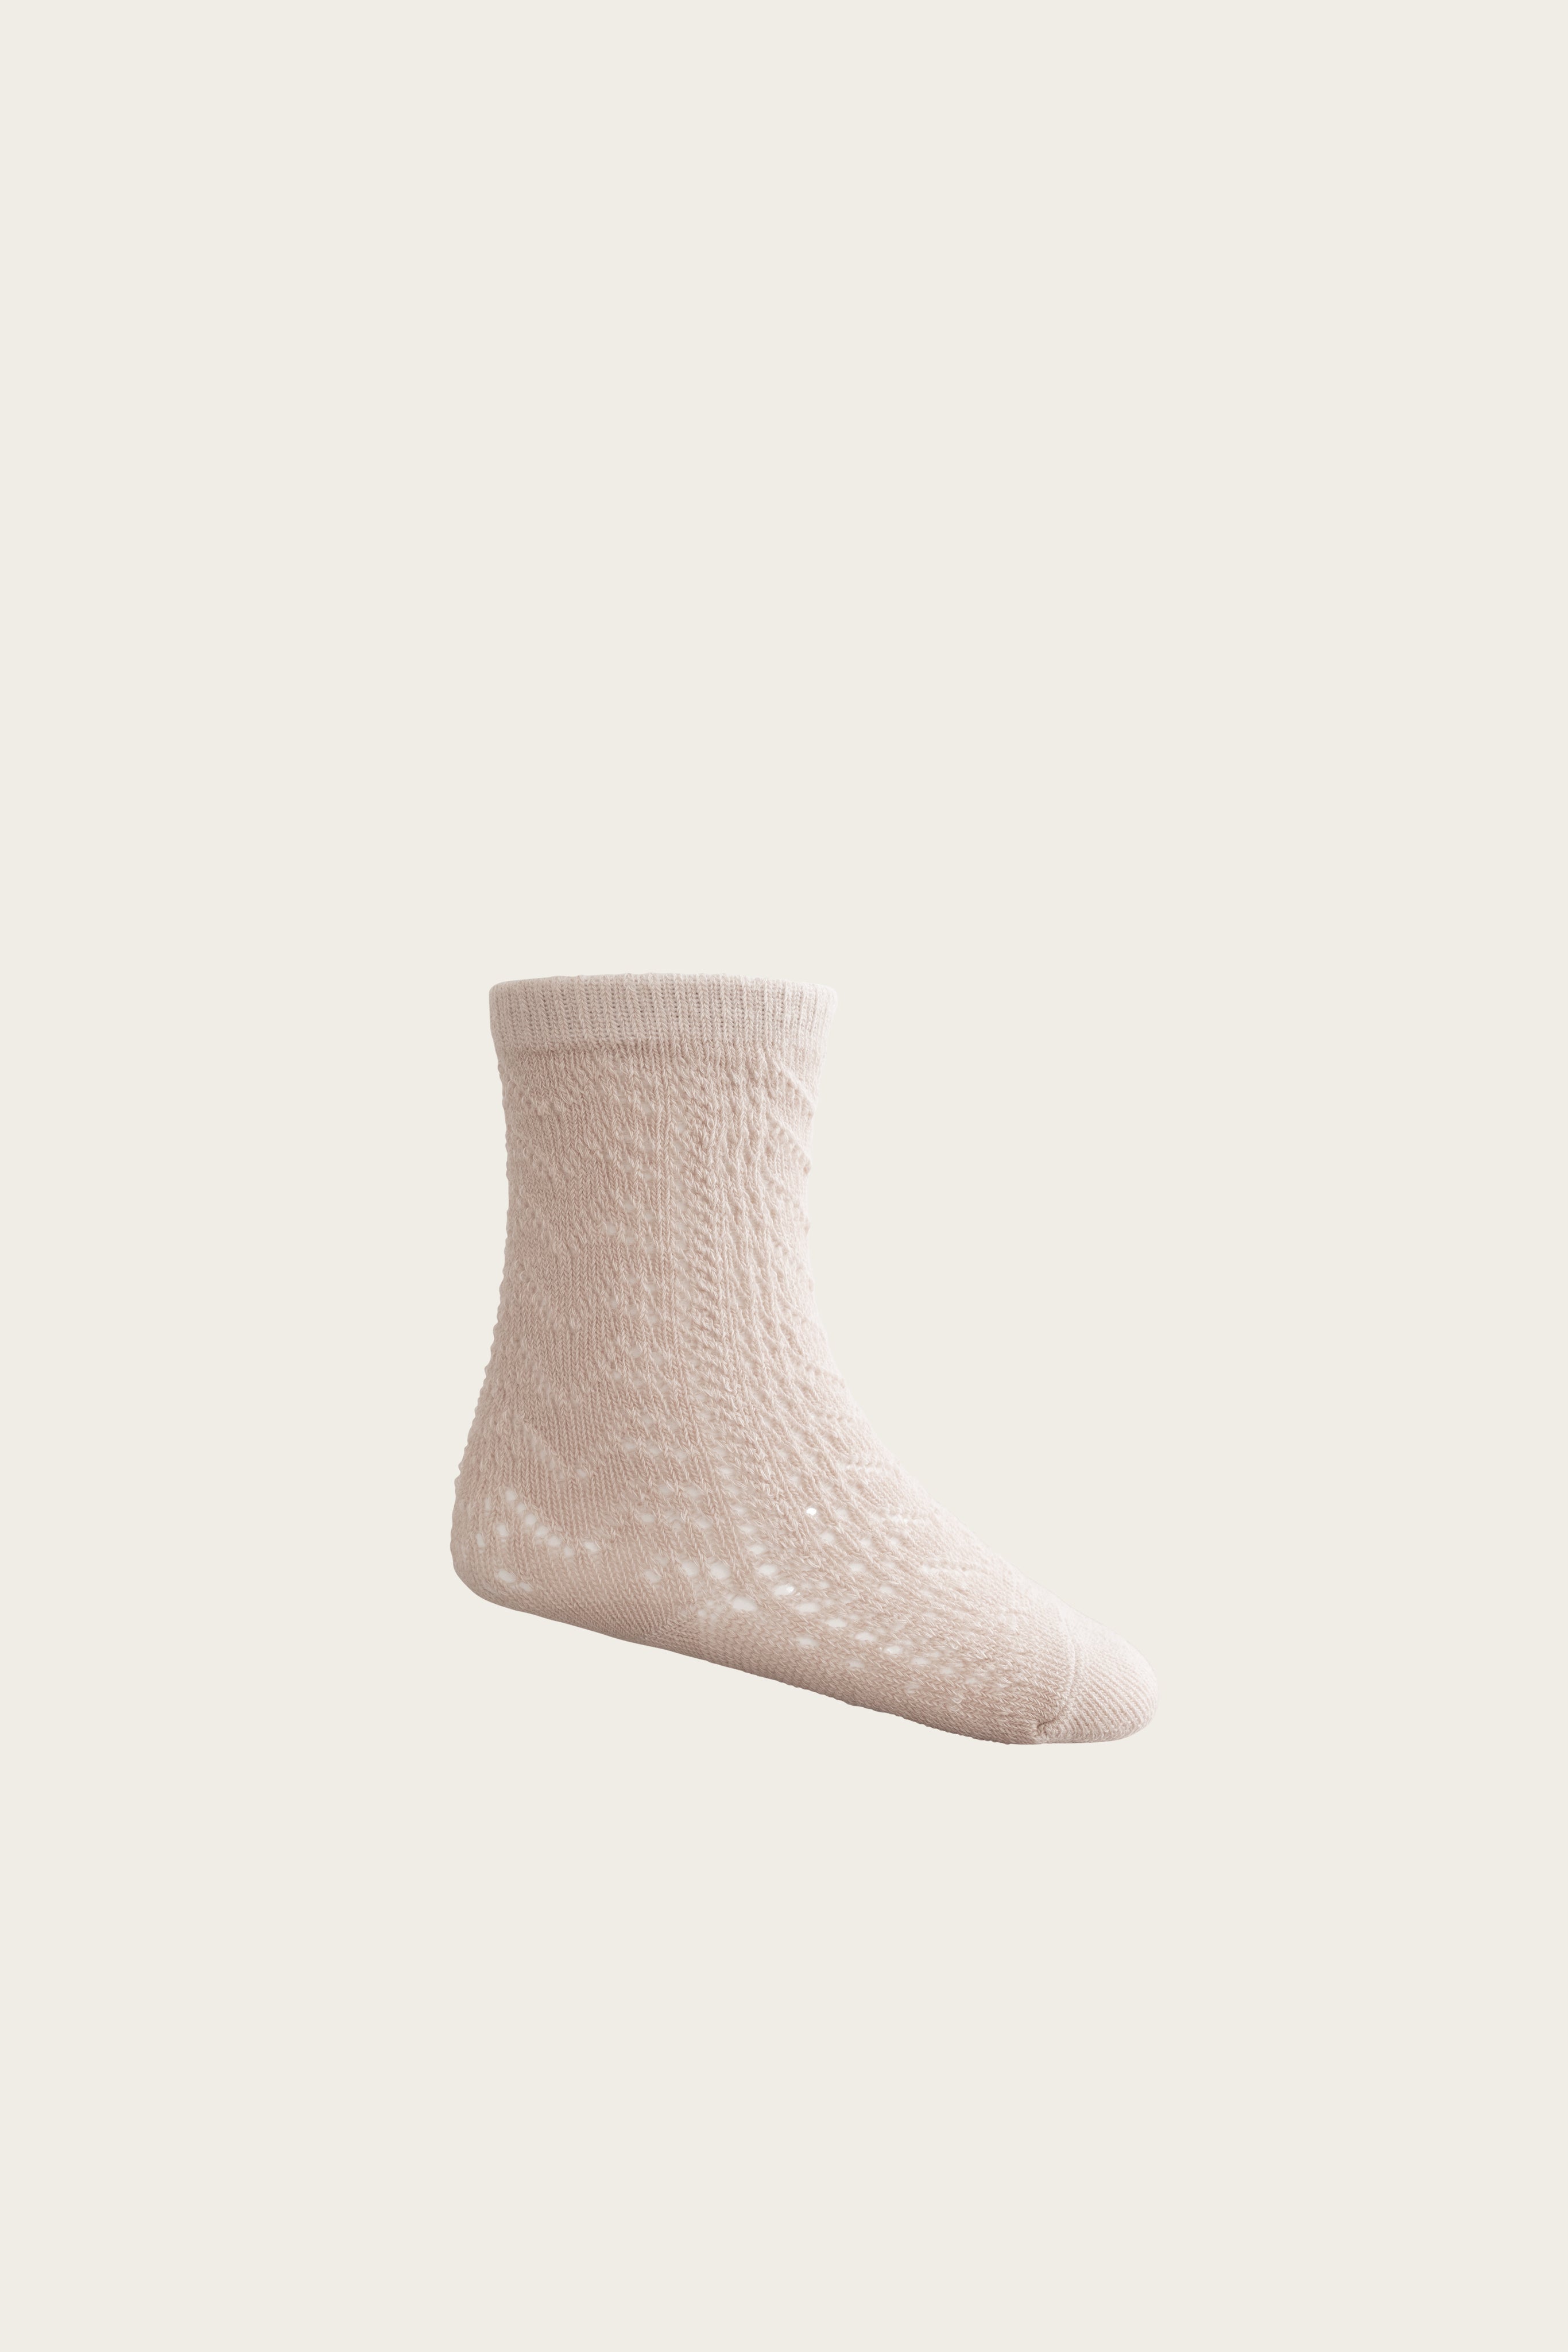 Cable Weave Knee High Sock - Pillow-Clothing & Accessories-Jamie Kay-The Bay Room